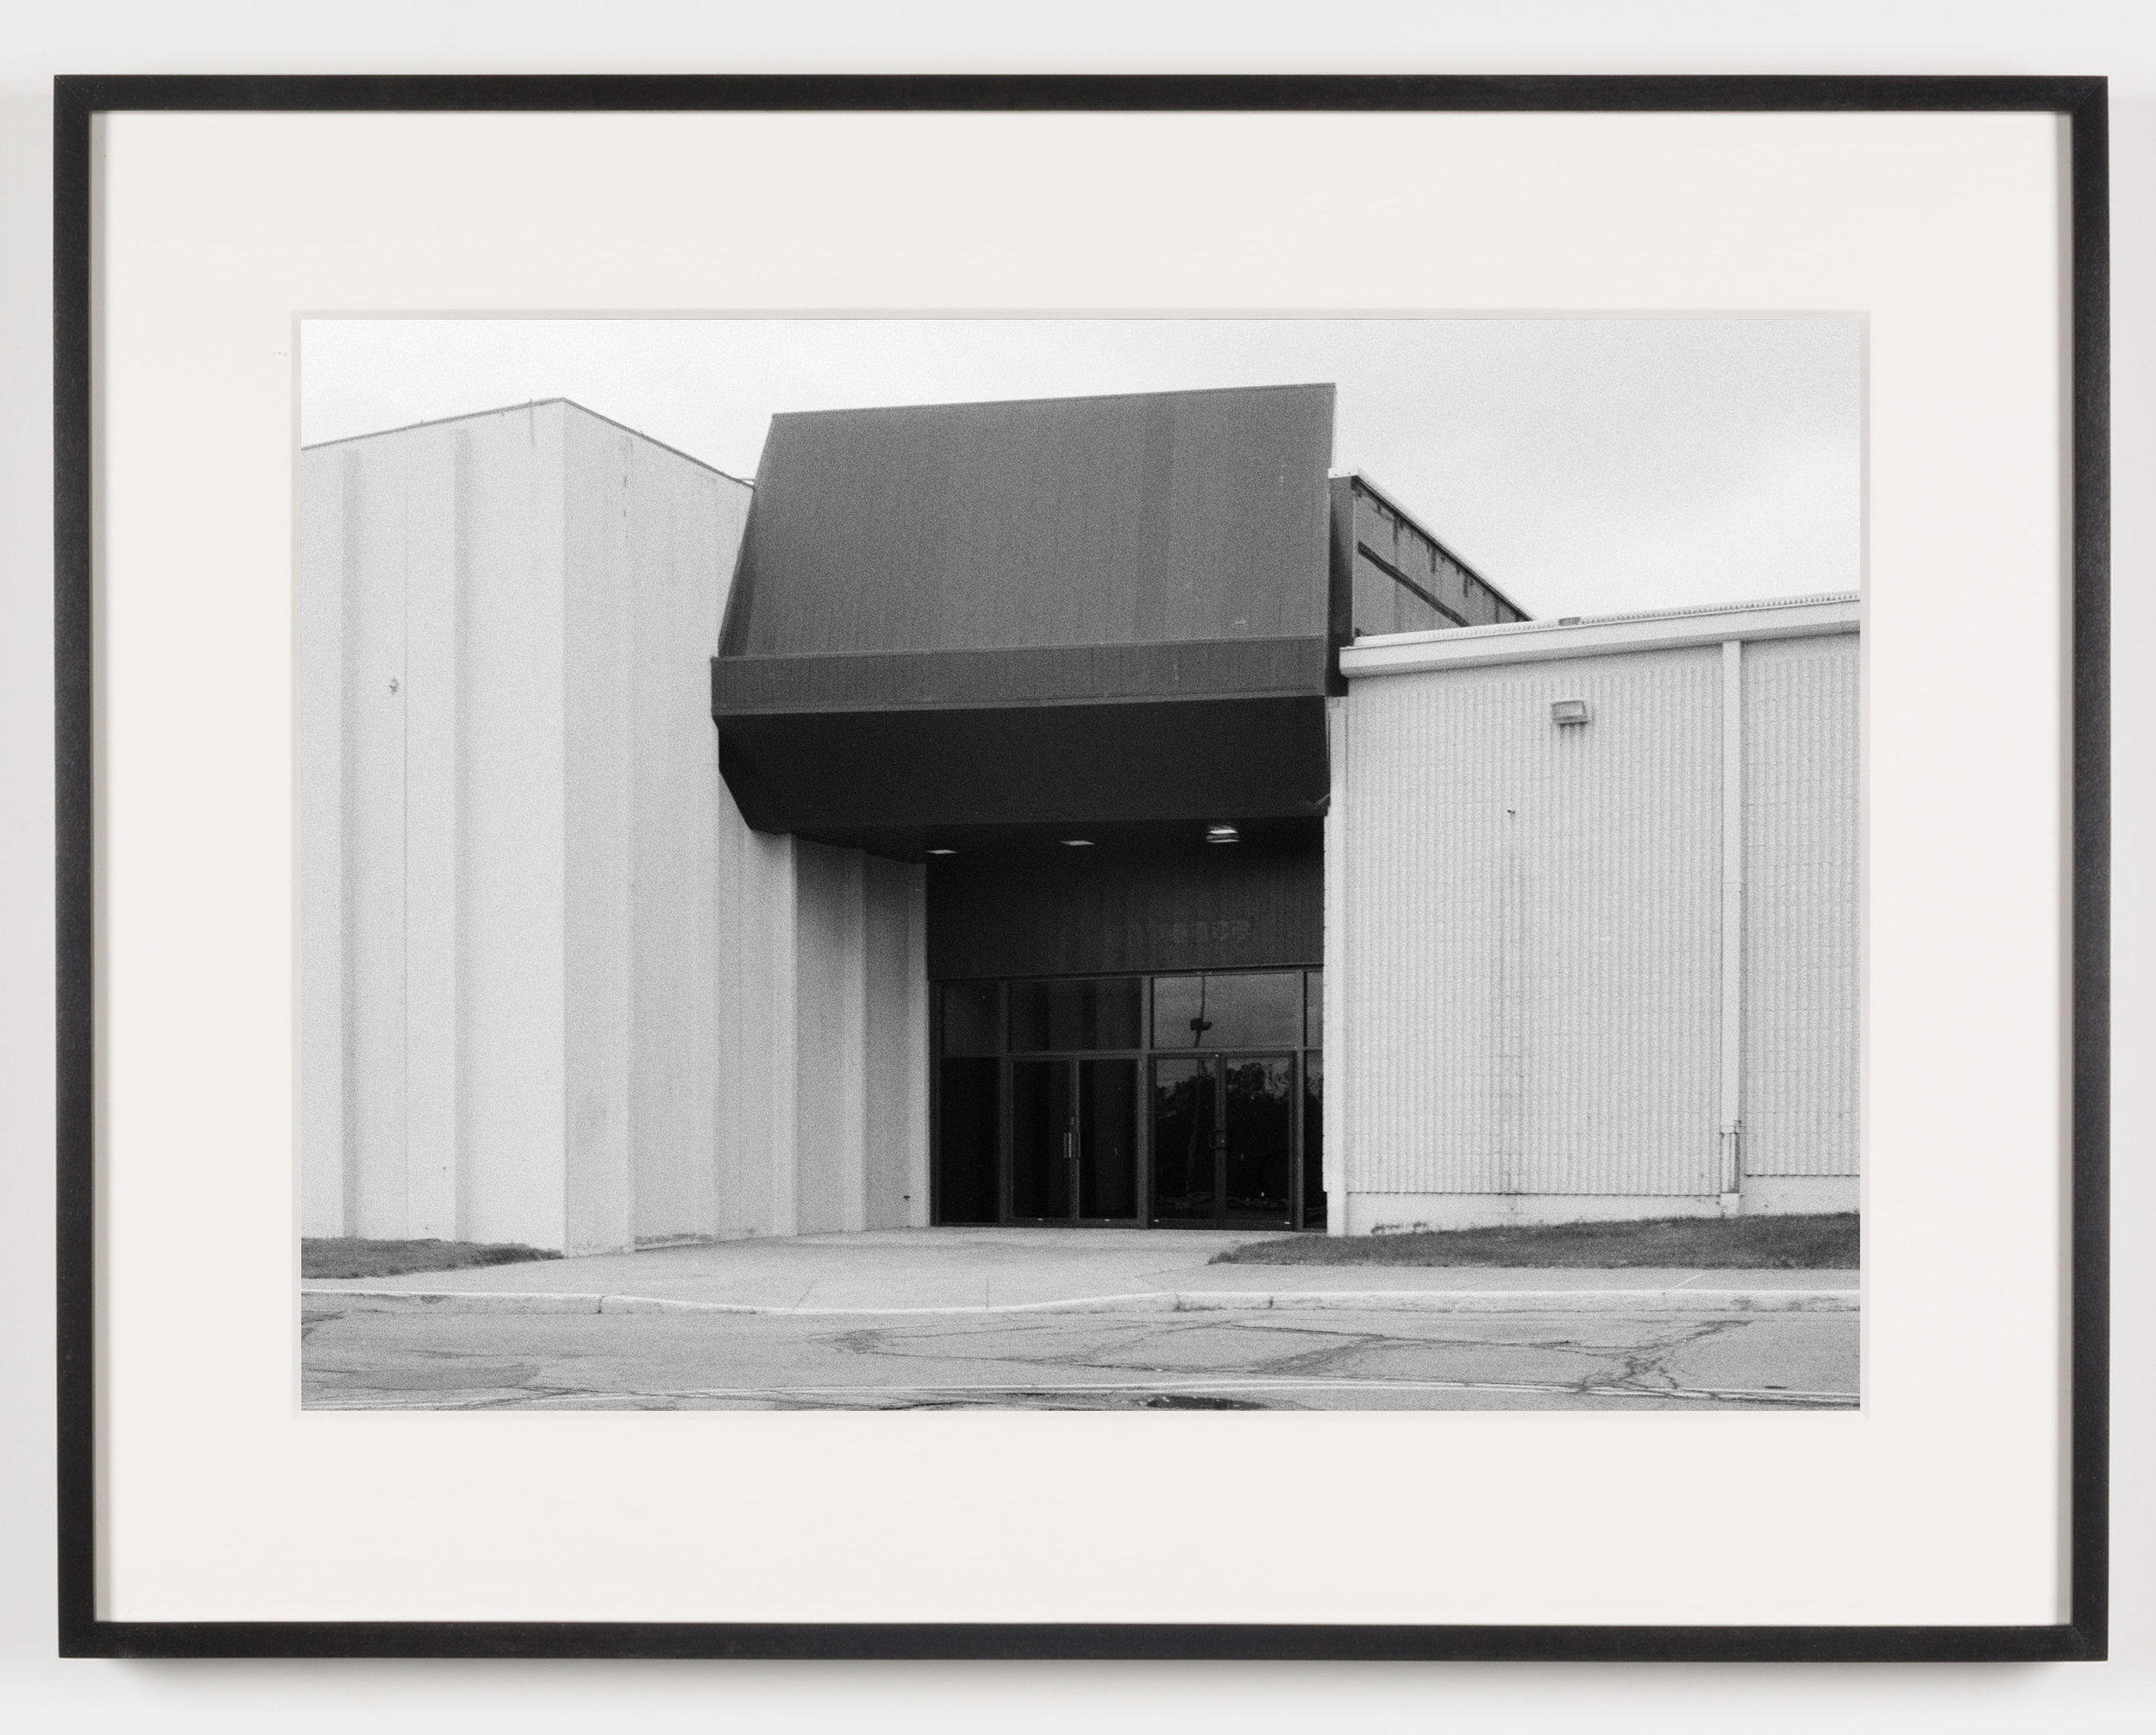   Midway Mall (View of Exterior), Elyria, OH, Est. 1965   2011  Epson Ultrachrome K3 archival ink jet print on Hahnemühle Photo Rag paper  21 5/8 x 28 1/8 inches   American Passages, 2001–2011    A Diagram of Forces, 2011     